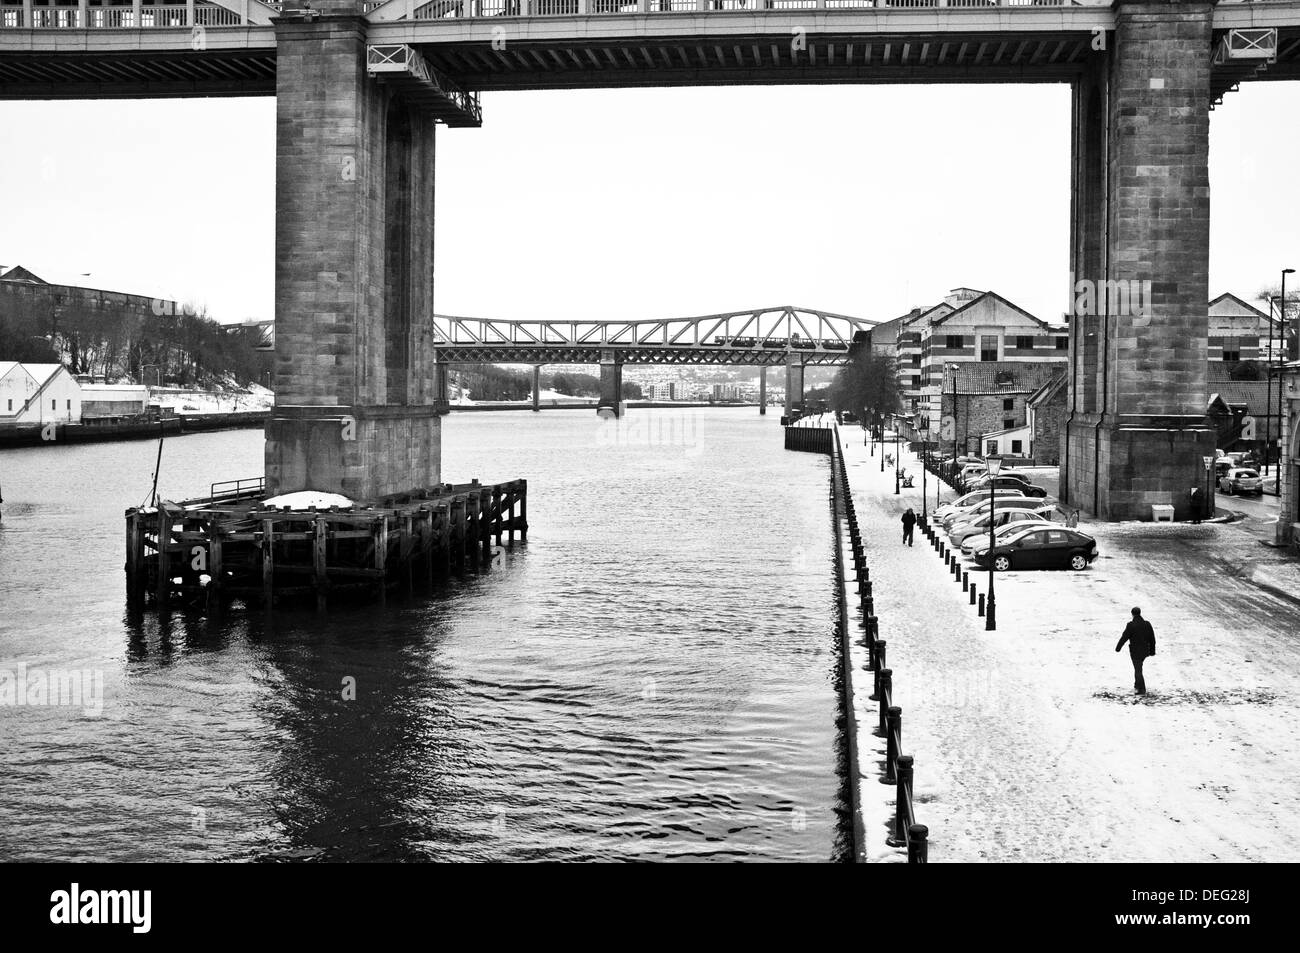 A winter scene of the Newcastle Upon Tyne Quayside. Taken winter 2012/13 from the Swing Bridge. Stock Photo